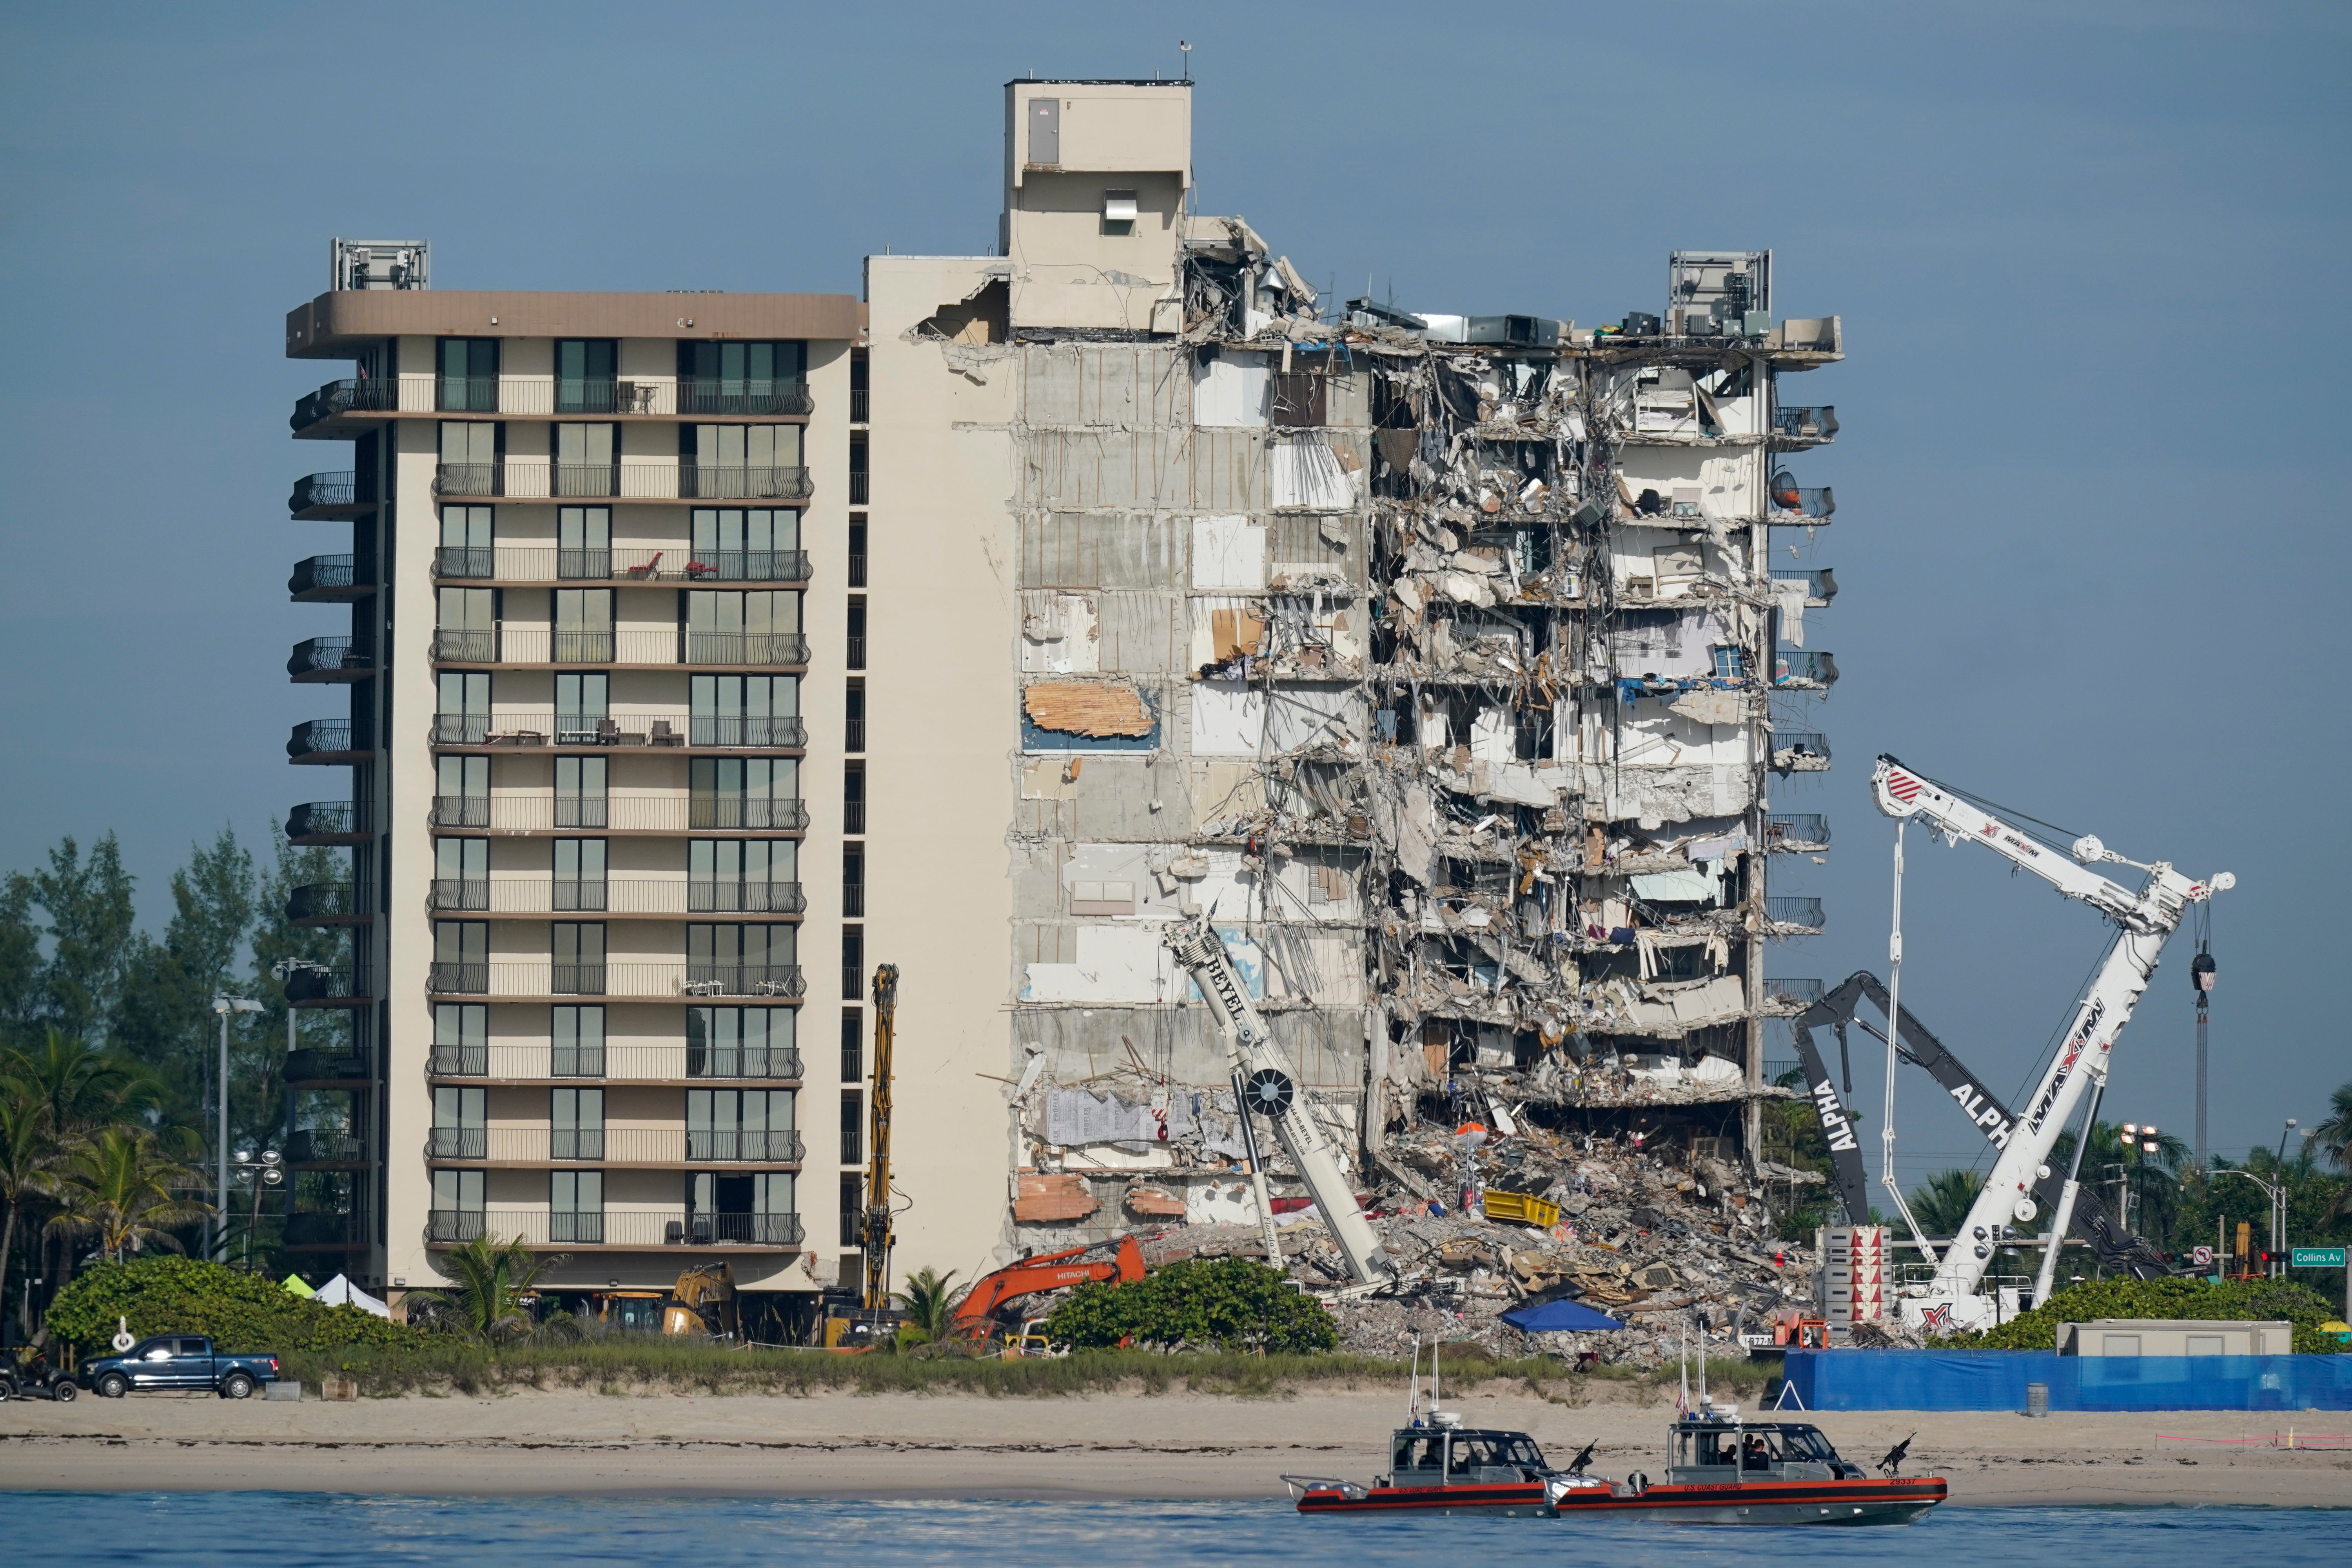 The Champlain Towers collapse has triggered a debate over coastal development, where older and less affluent residents are struggling with the cost of upkeep on modest buildings while more glamorous new developments are being built